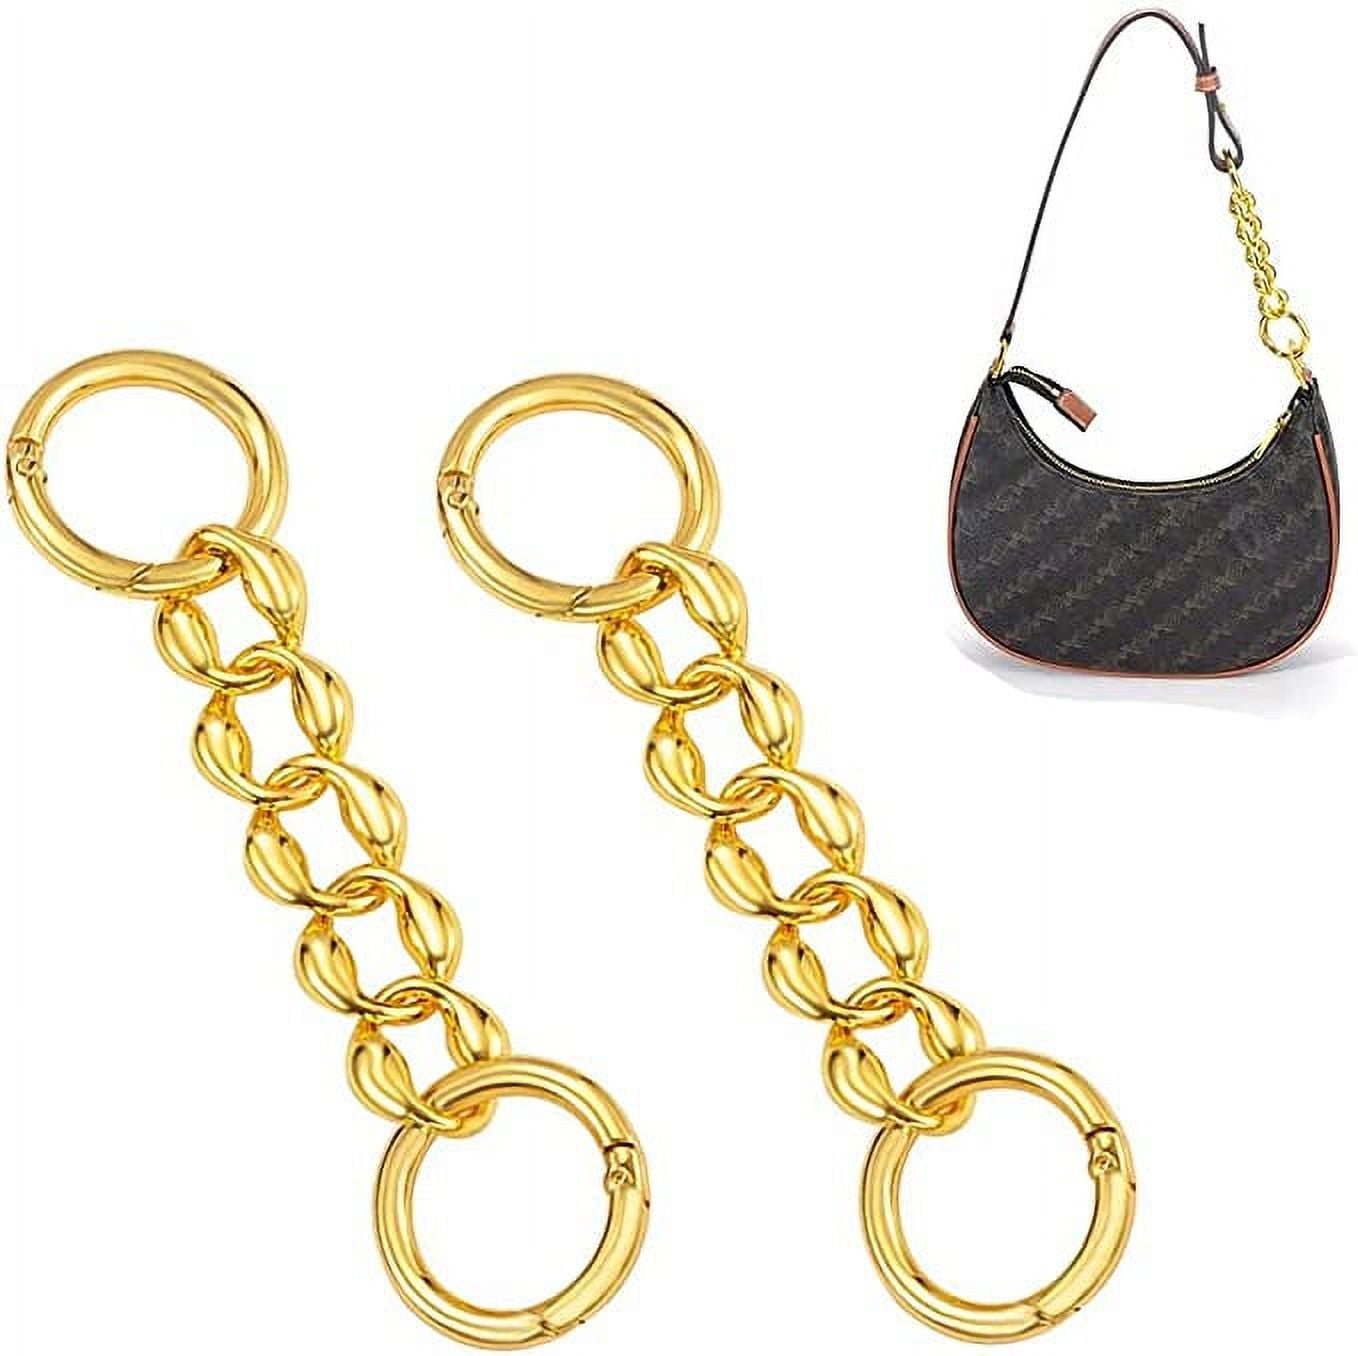  FKKWUOT Gold Purse Chain Strap,Purse Strap Extender for Coach  Bag,Chain Replacement Accessories for Crossbody and Various Styles Bags  (Black) : Arts, Crafts & Sewing